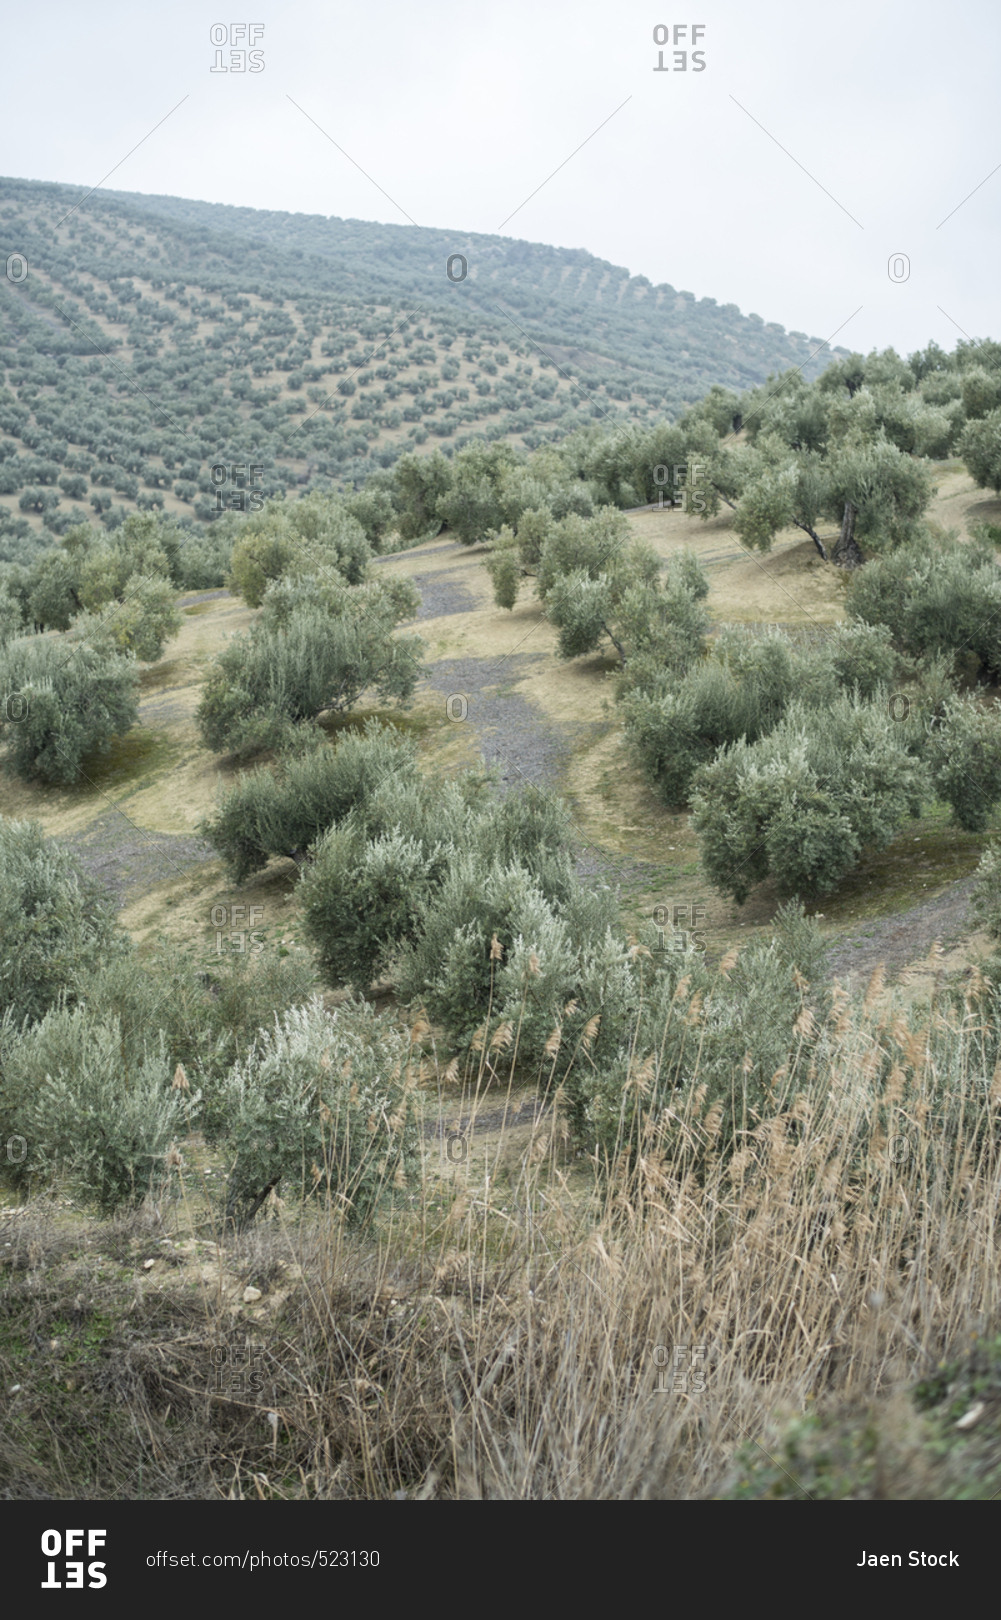 Olive trees on a cloudy and foggy morning in Jaen, Spain. Extension intended for planting to obtain olive oil.